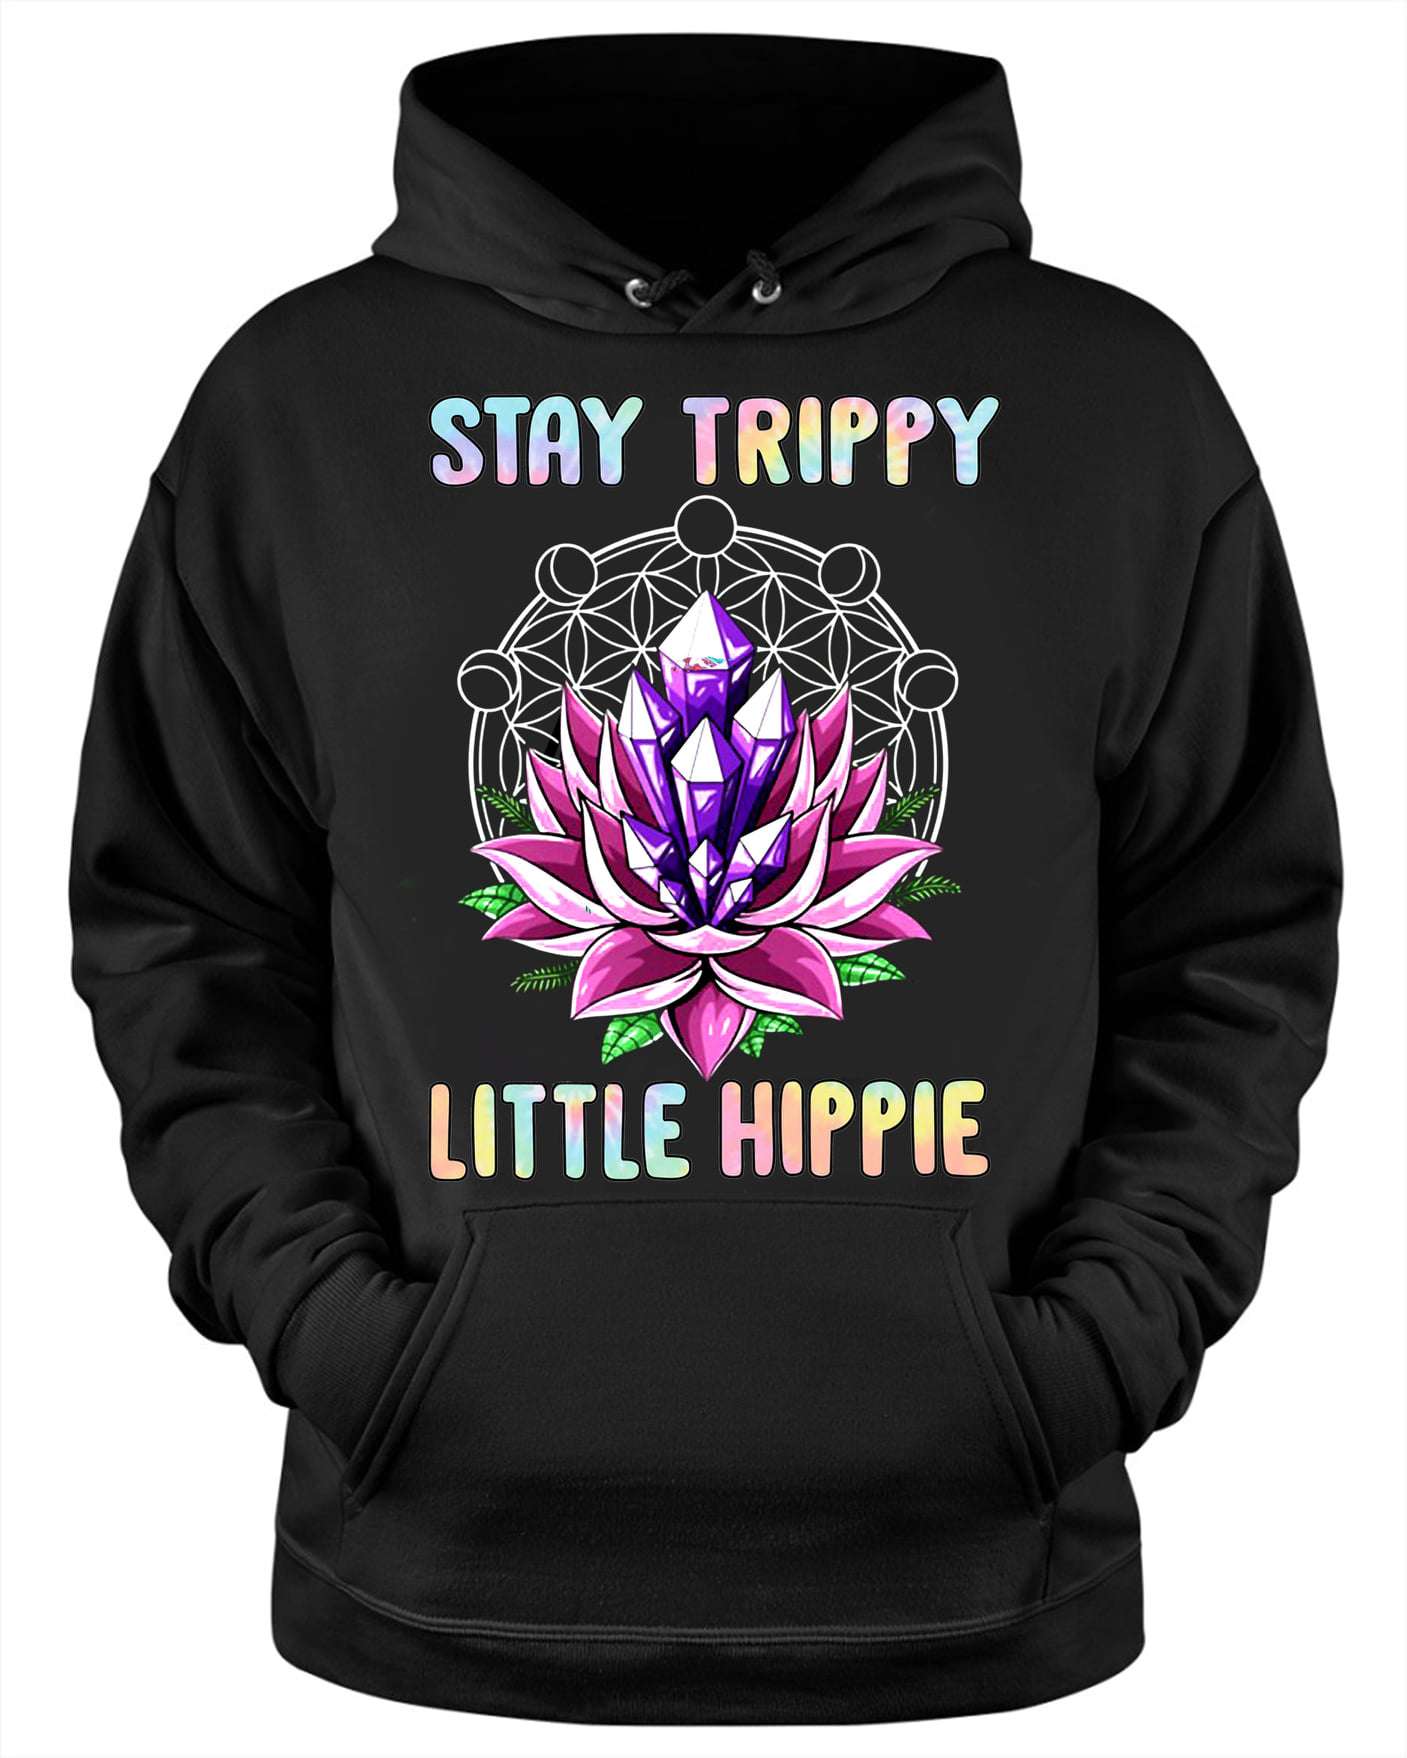 Stay trippy little Hippie - Hippie life style, shaphire and lotus